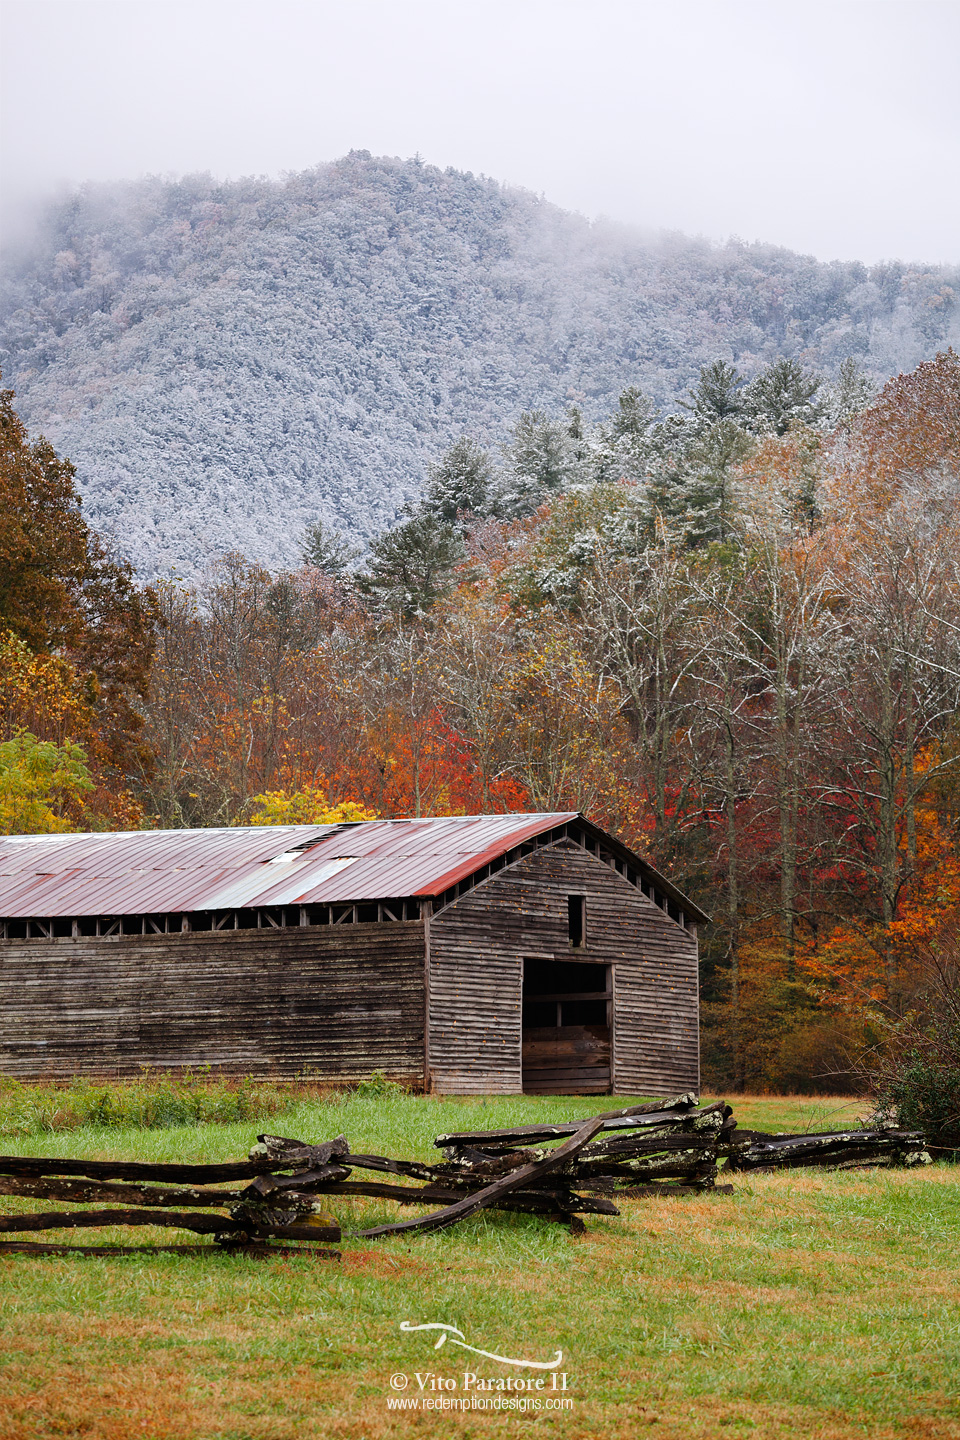 Dan Lawson's Barn - Cades Cove, Great Smoky Mountains NP, Tennessee